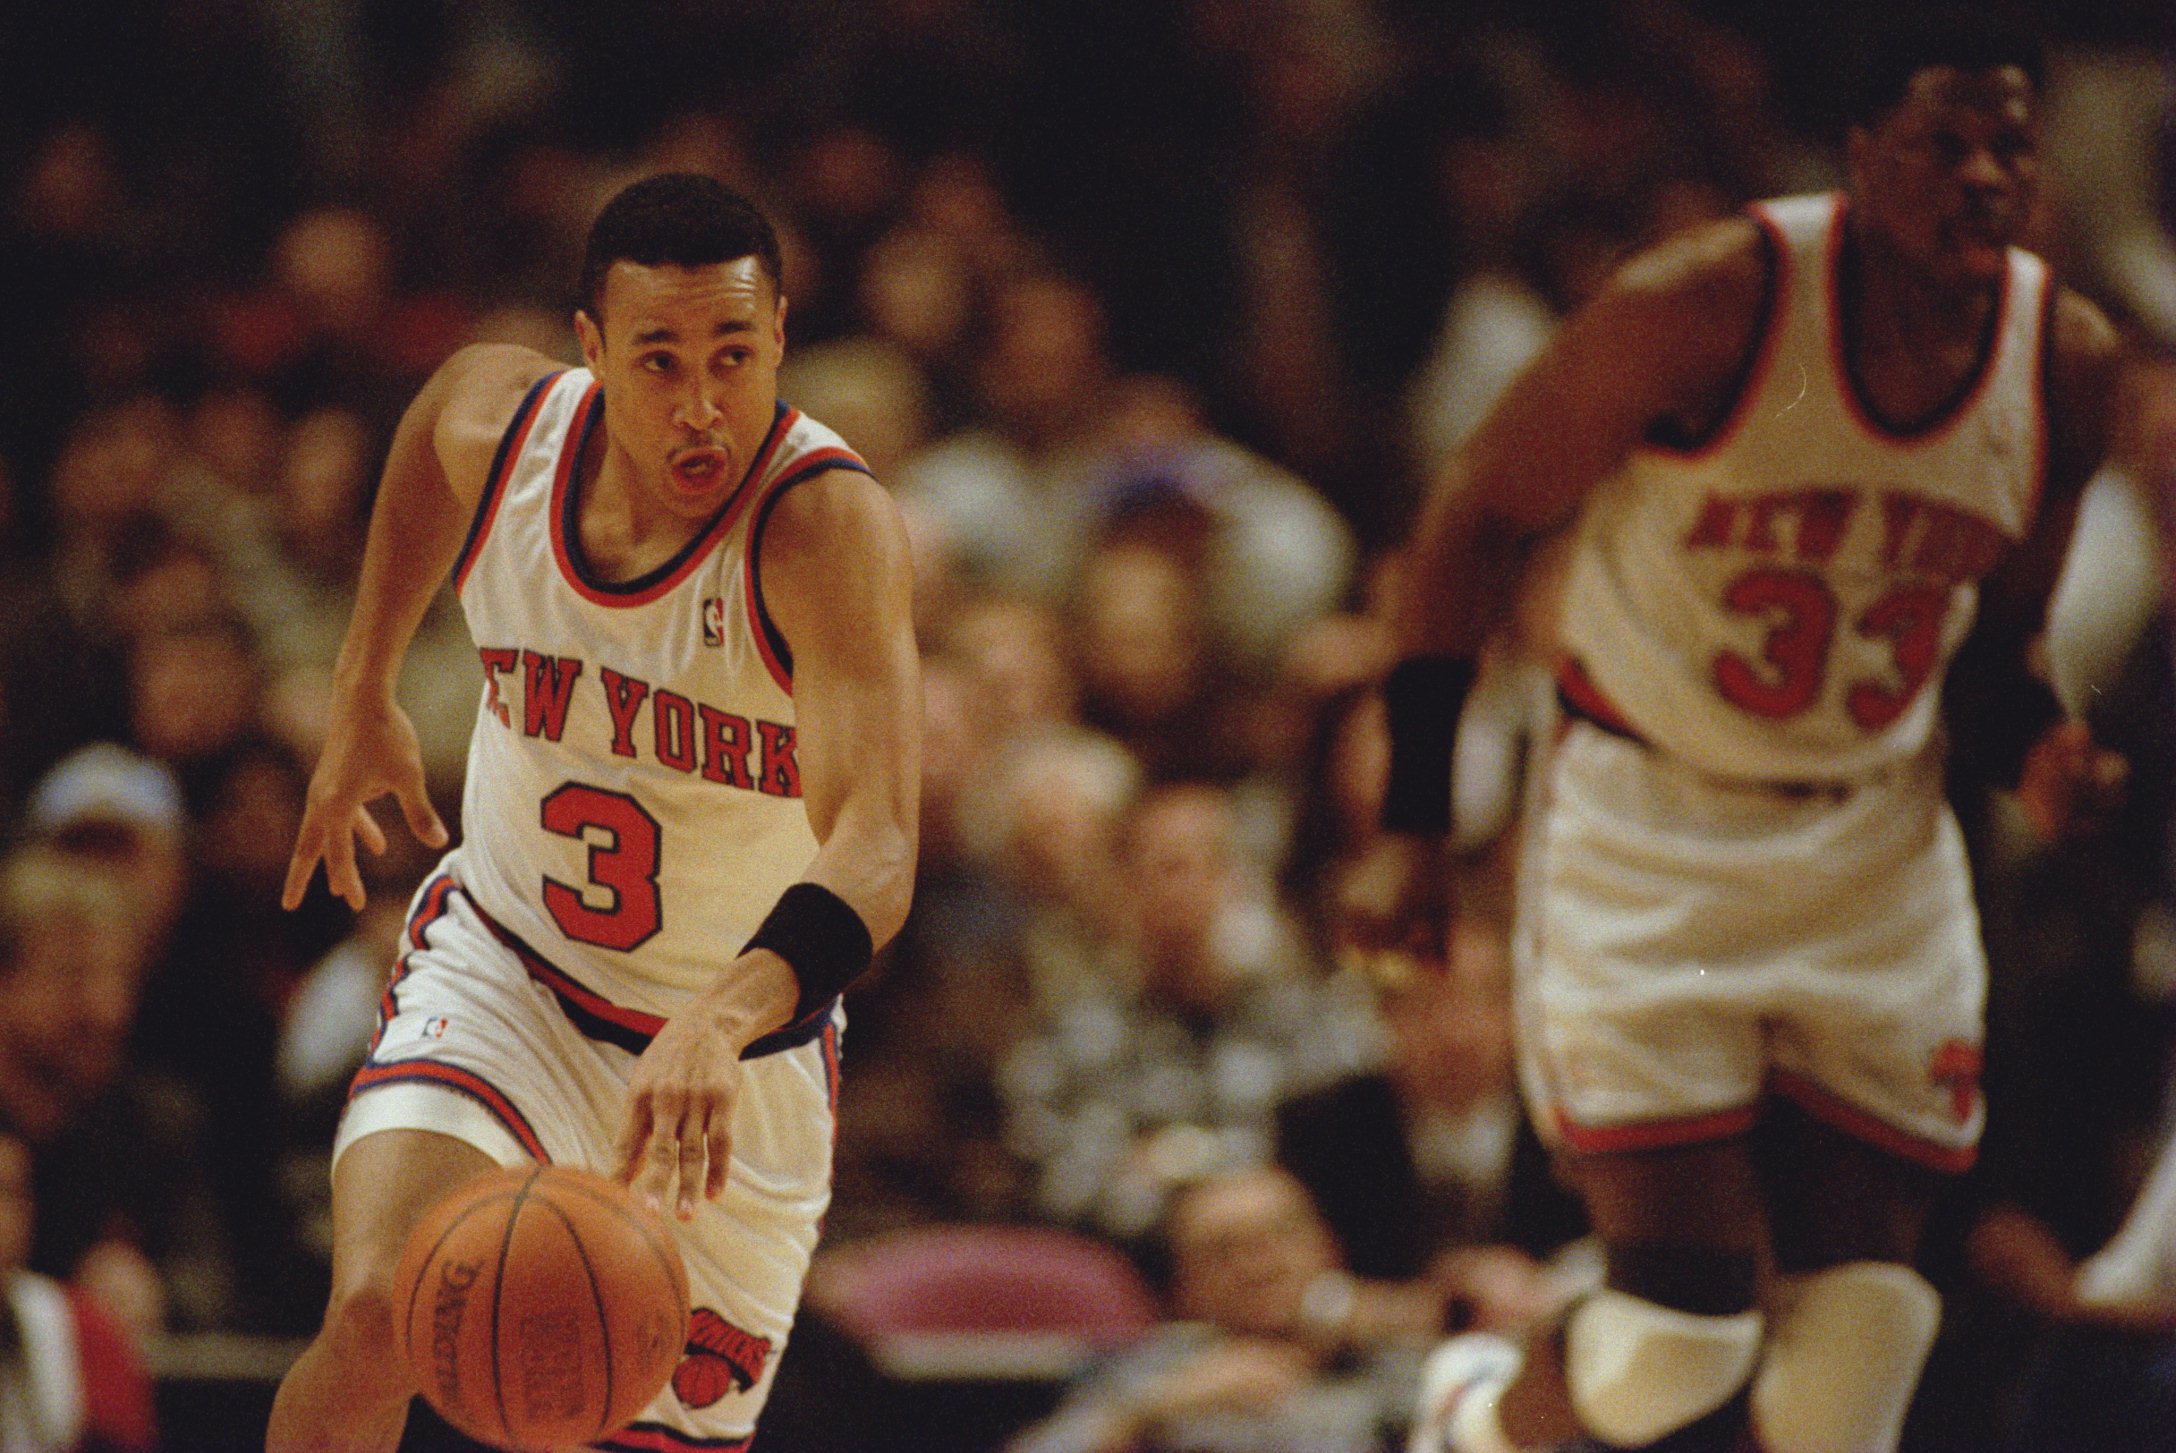 NBA or bust: John Starks was determined to make it